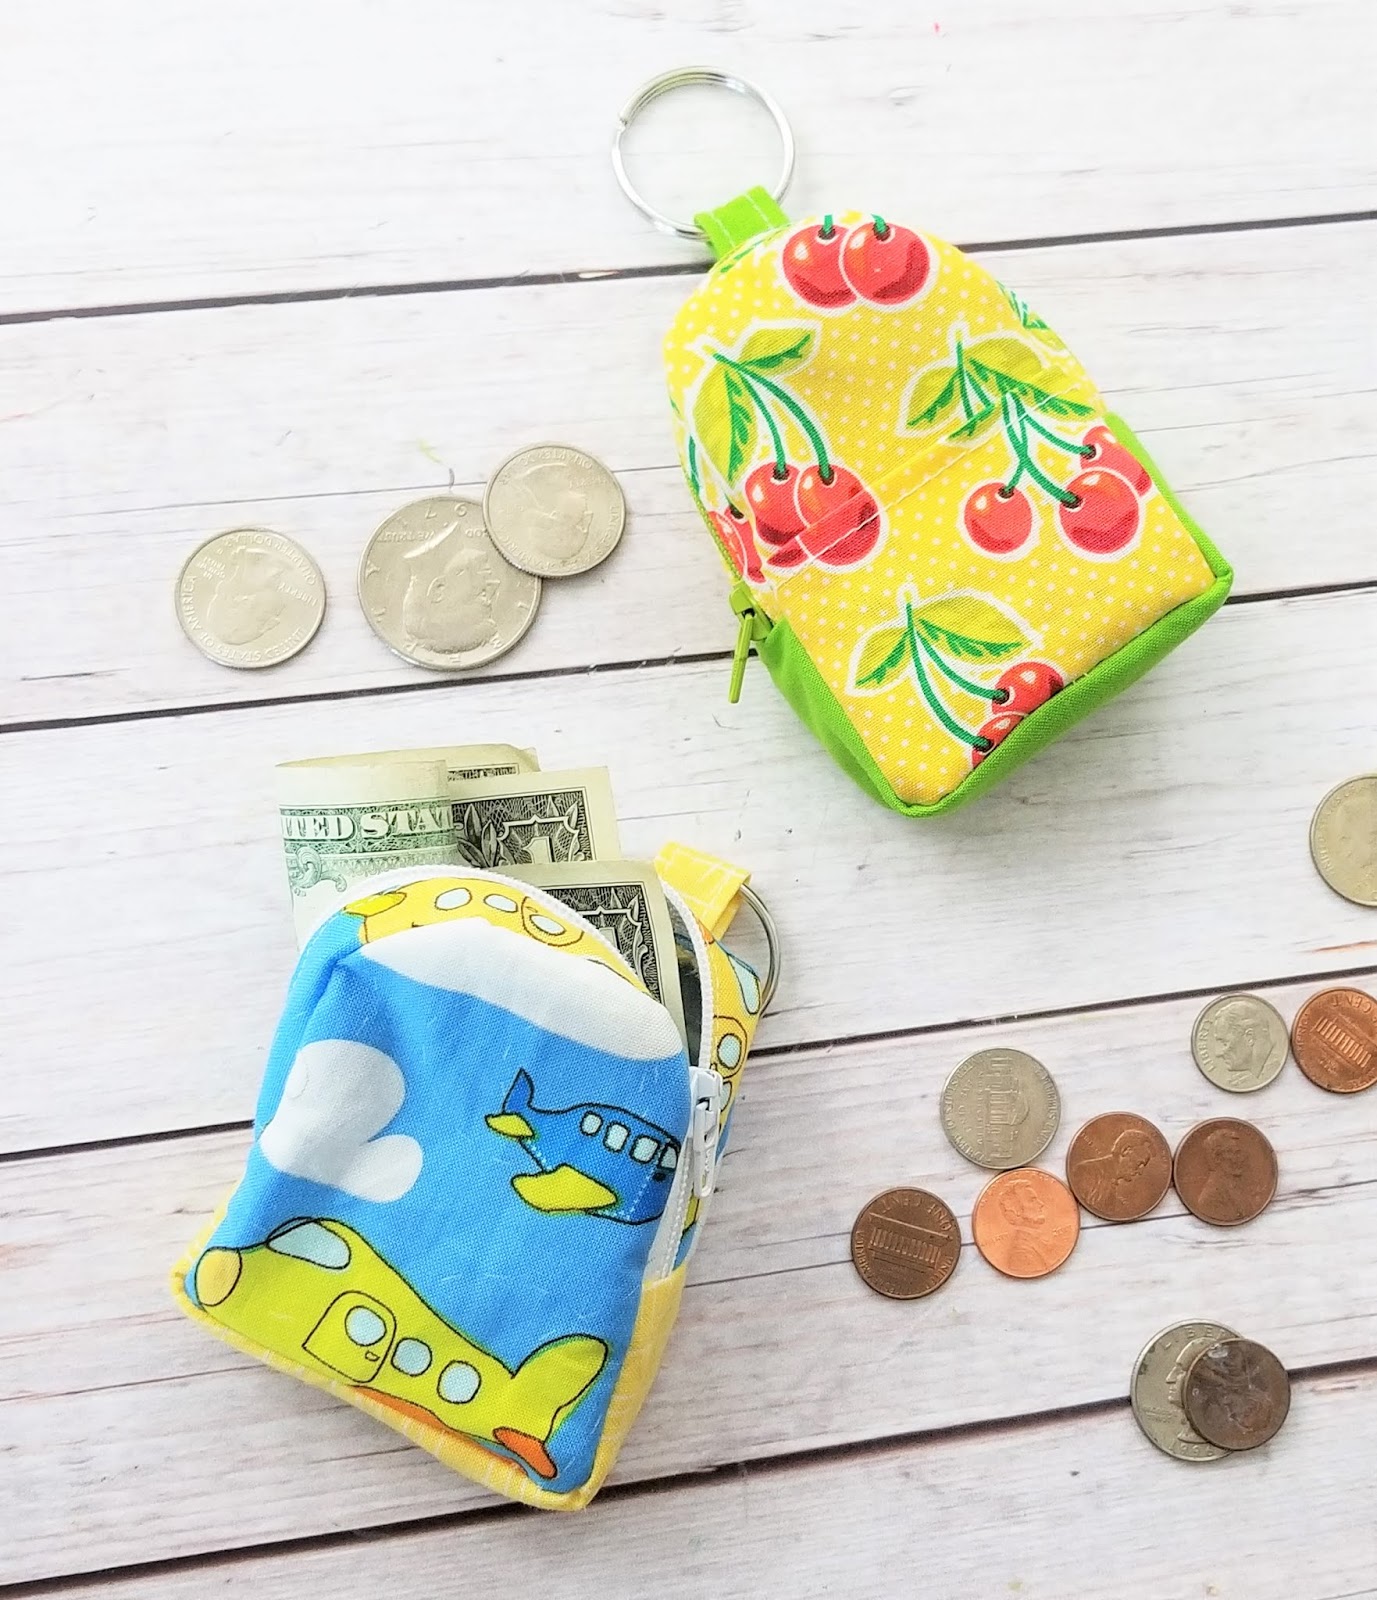 SWEET DIY MINI BACKPACK COINS POUCH TUTORIAL STEP BY STEP #sewinghacks  #miniature - YouTube